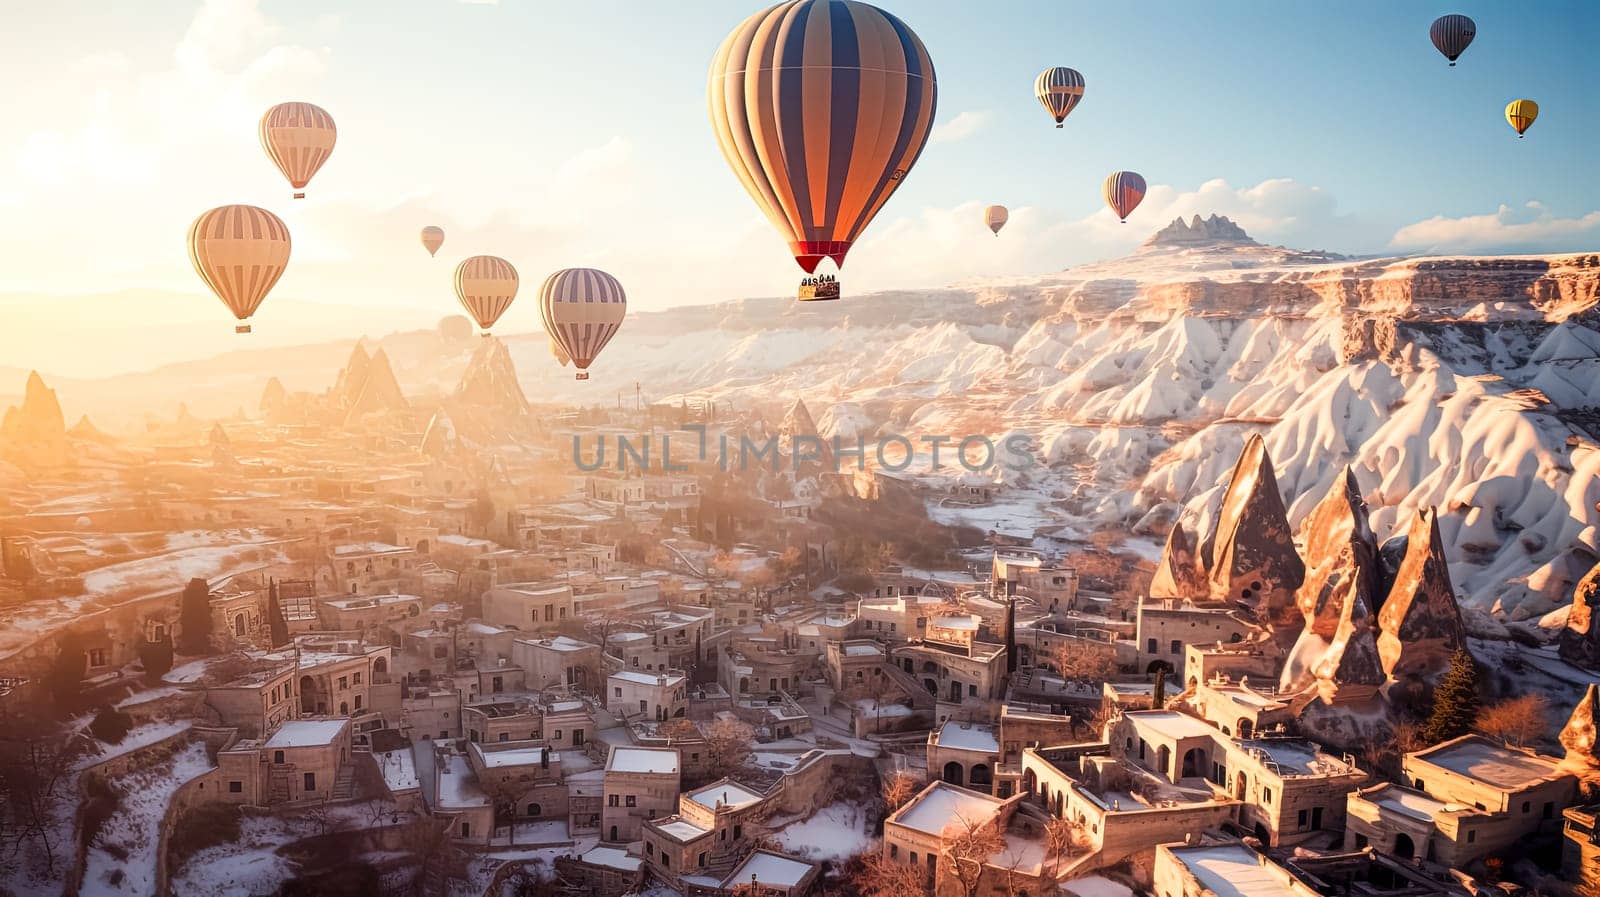 A hot air balloon festival is taking place in a small town. The sky is filled with colorful hot air balloons, creating a vibrant and lively atmosphere. The town is surrounded by mountains